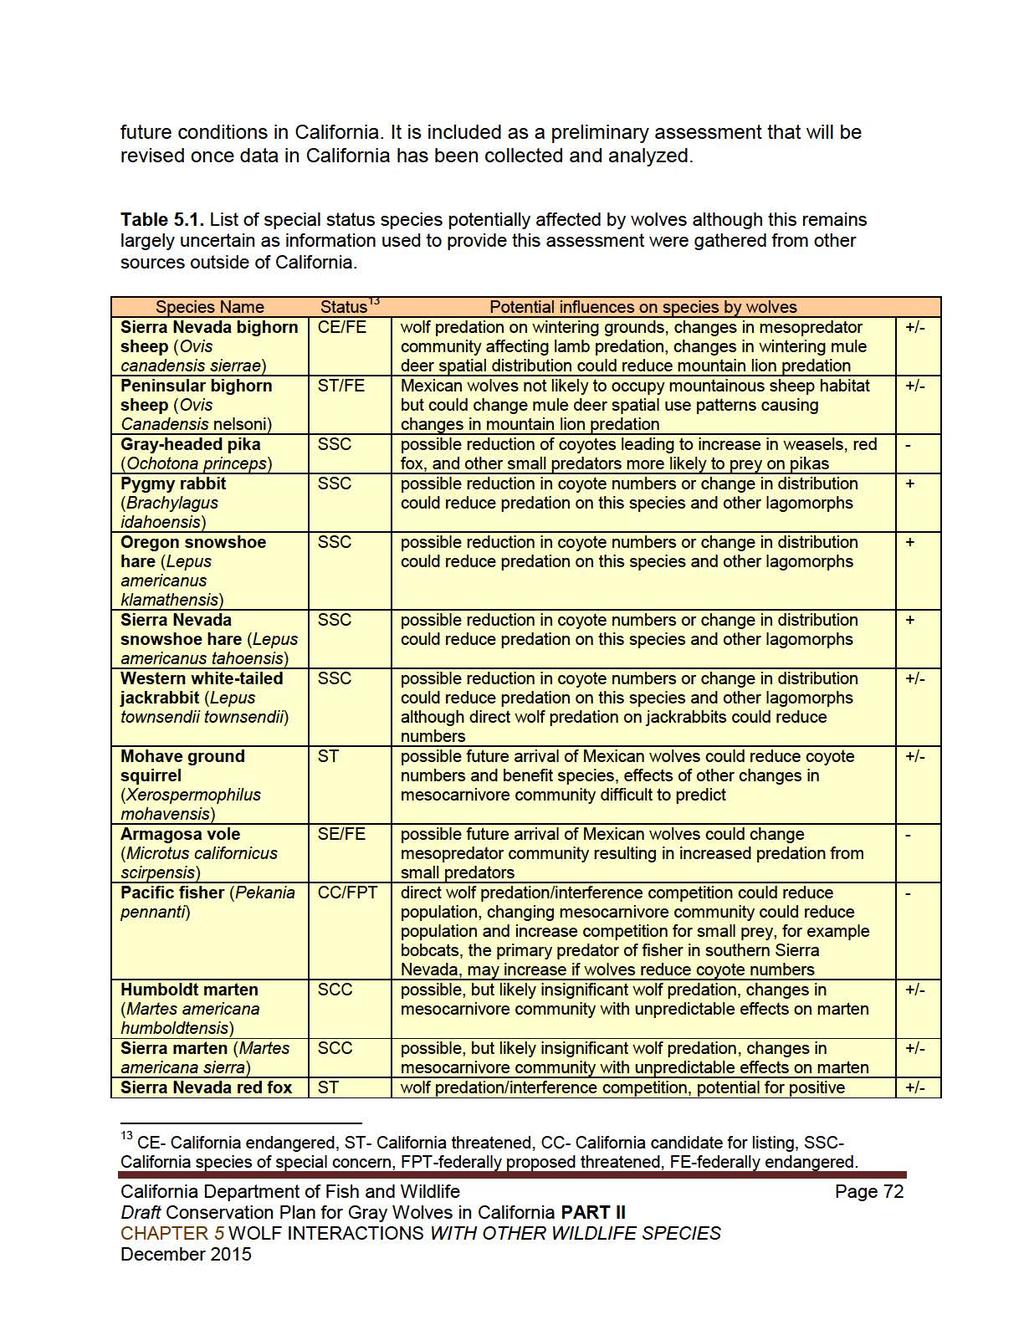 future conditions in California. It is included as a preliminary assessment that will be revised once data in California has been collected and analyzed. Table 5.1.